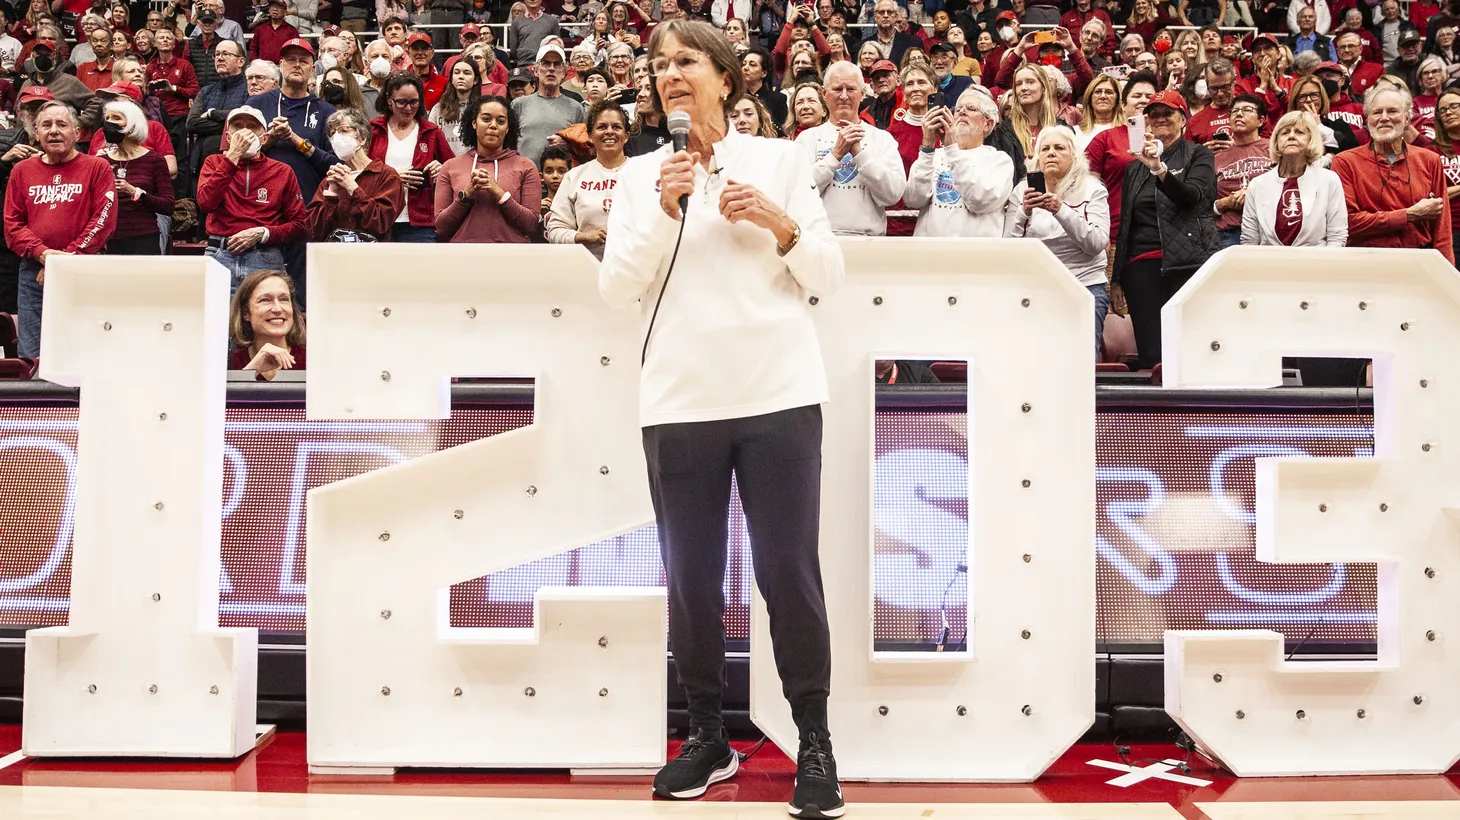 Stanford Head Coach Tara VanDerveer celebrates after the Stanford Cardinal beat the Oregon State Beavers during the NCAA women's basketball game, at Maples Pavilion Stanford, CA, January 21, 2024.